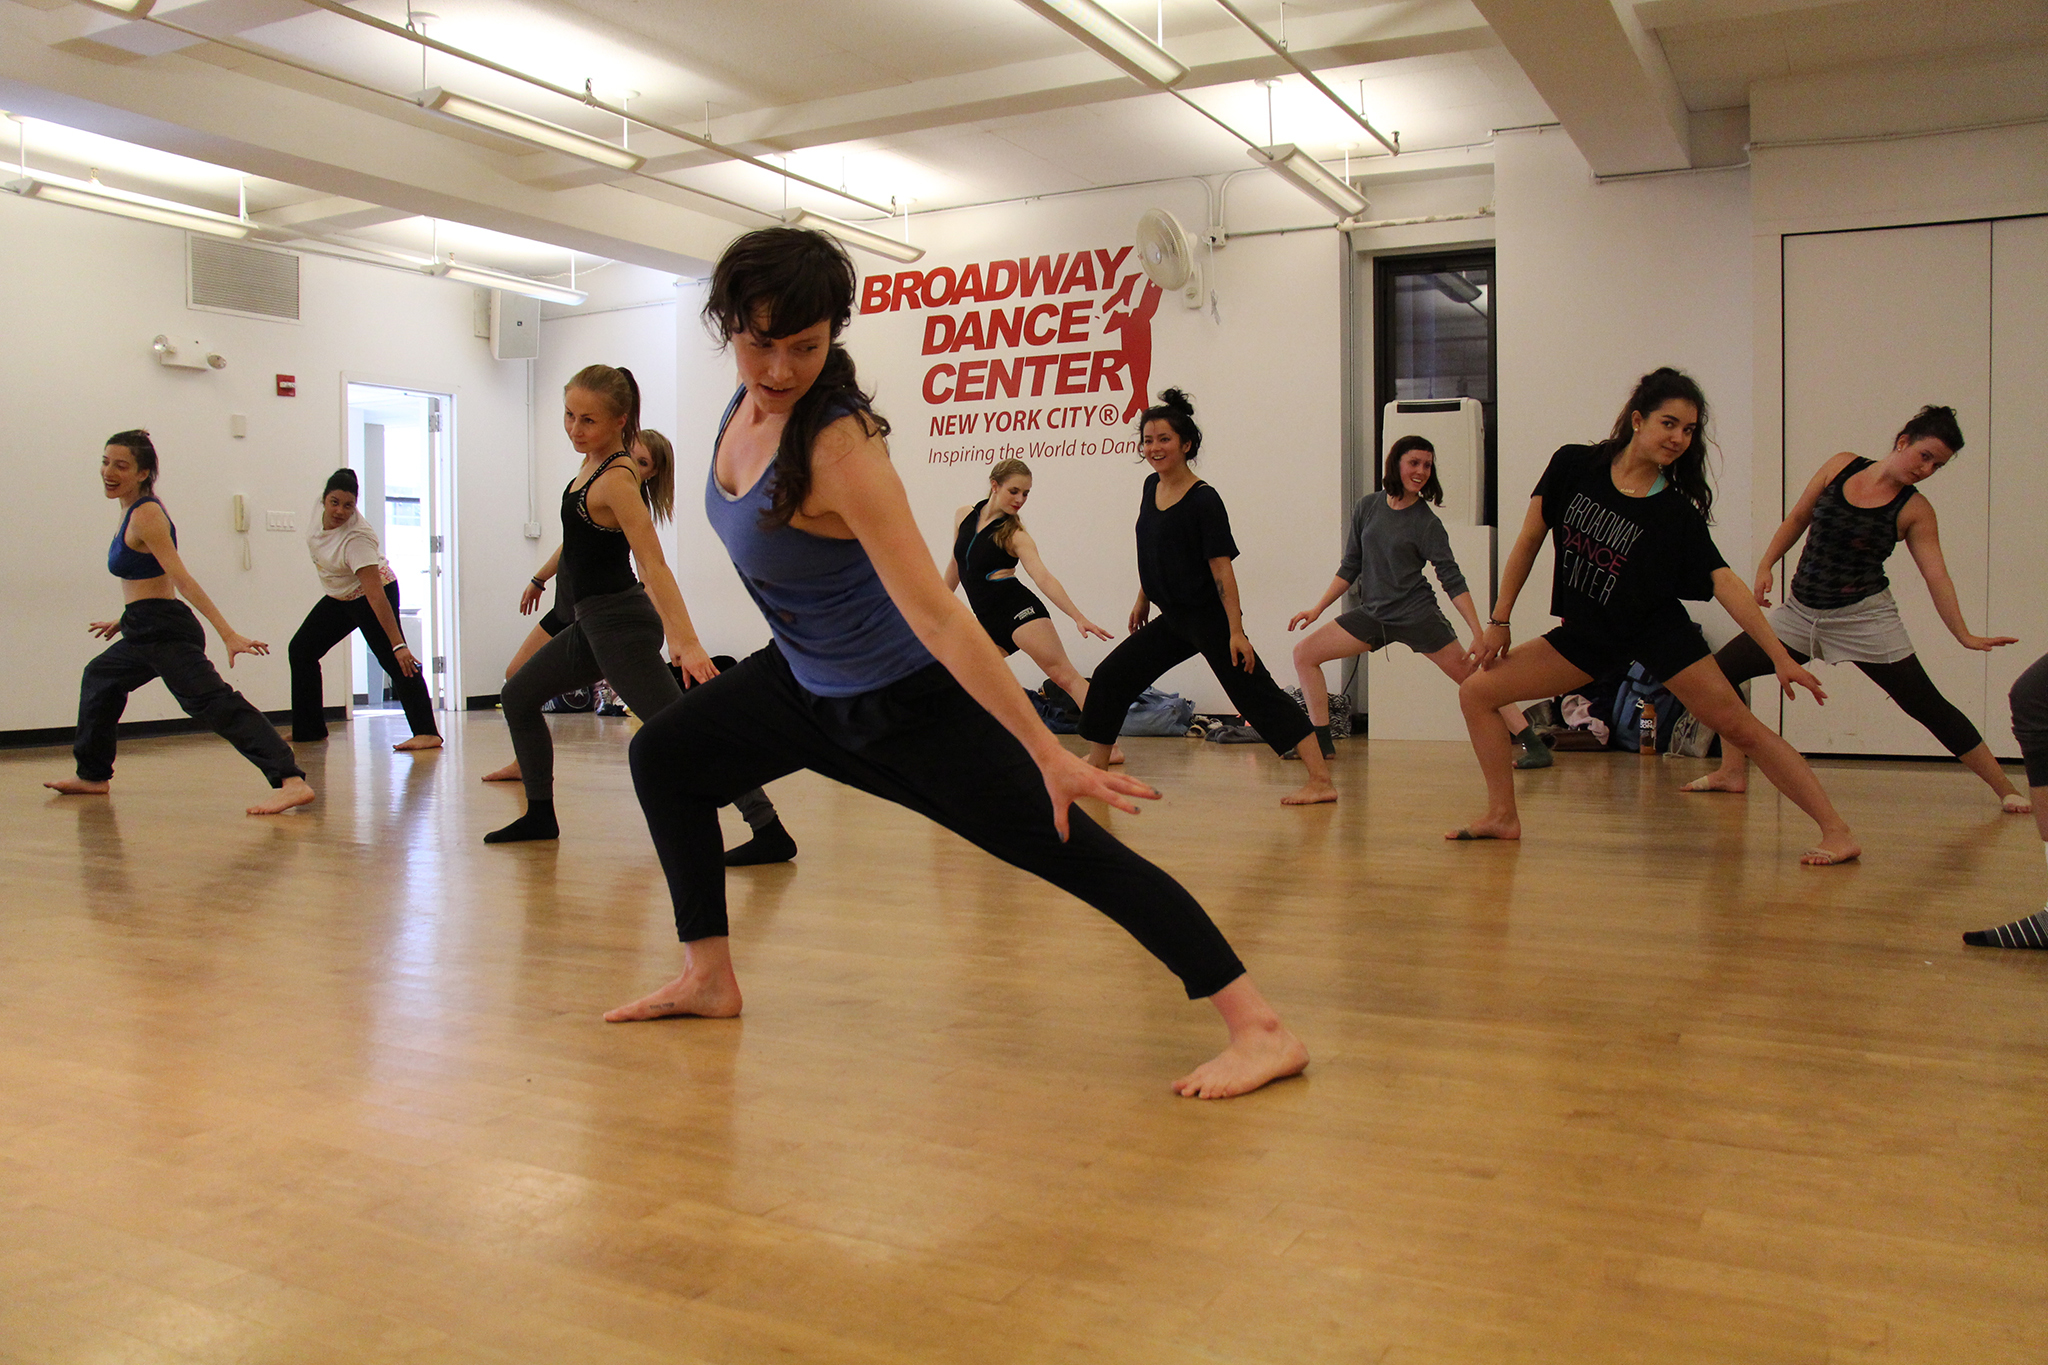 Best Dance Classes in NYC for Ballet, Tap, Jazz and More